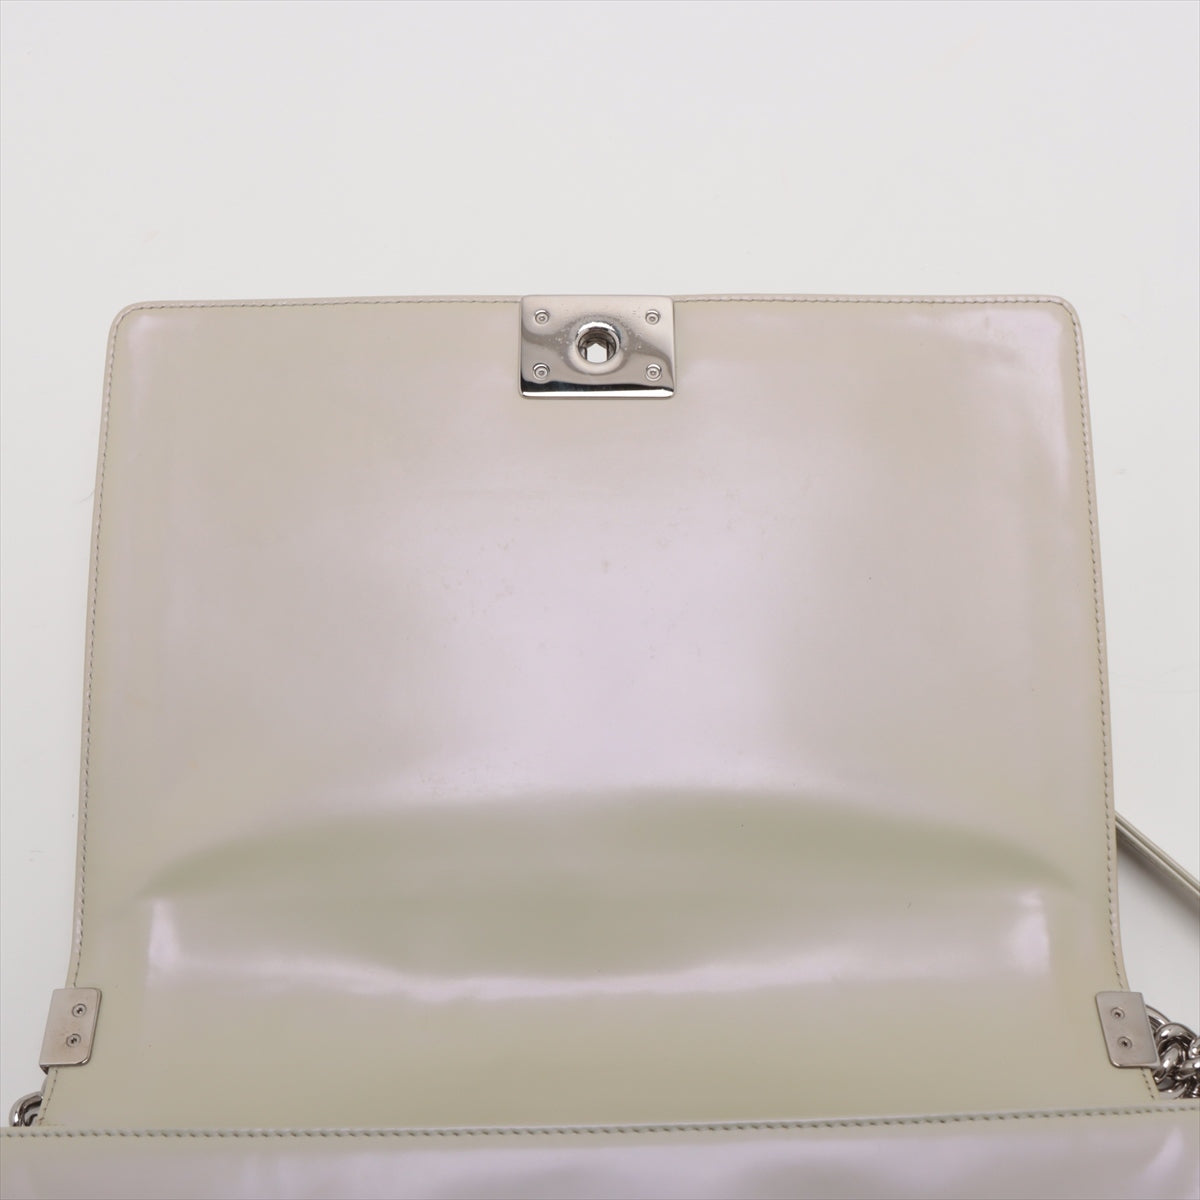 Chanel Boy Chanel Patent Leather Chain Shoulder Bag Pearl White Silver